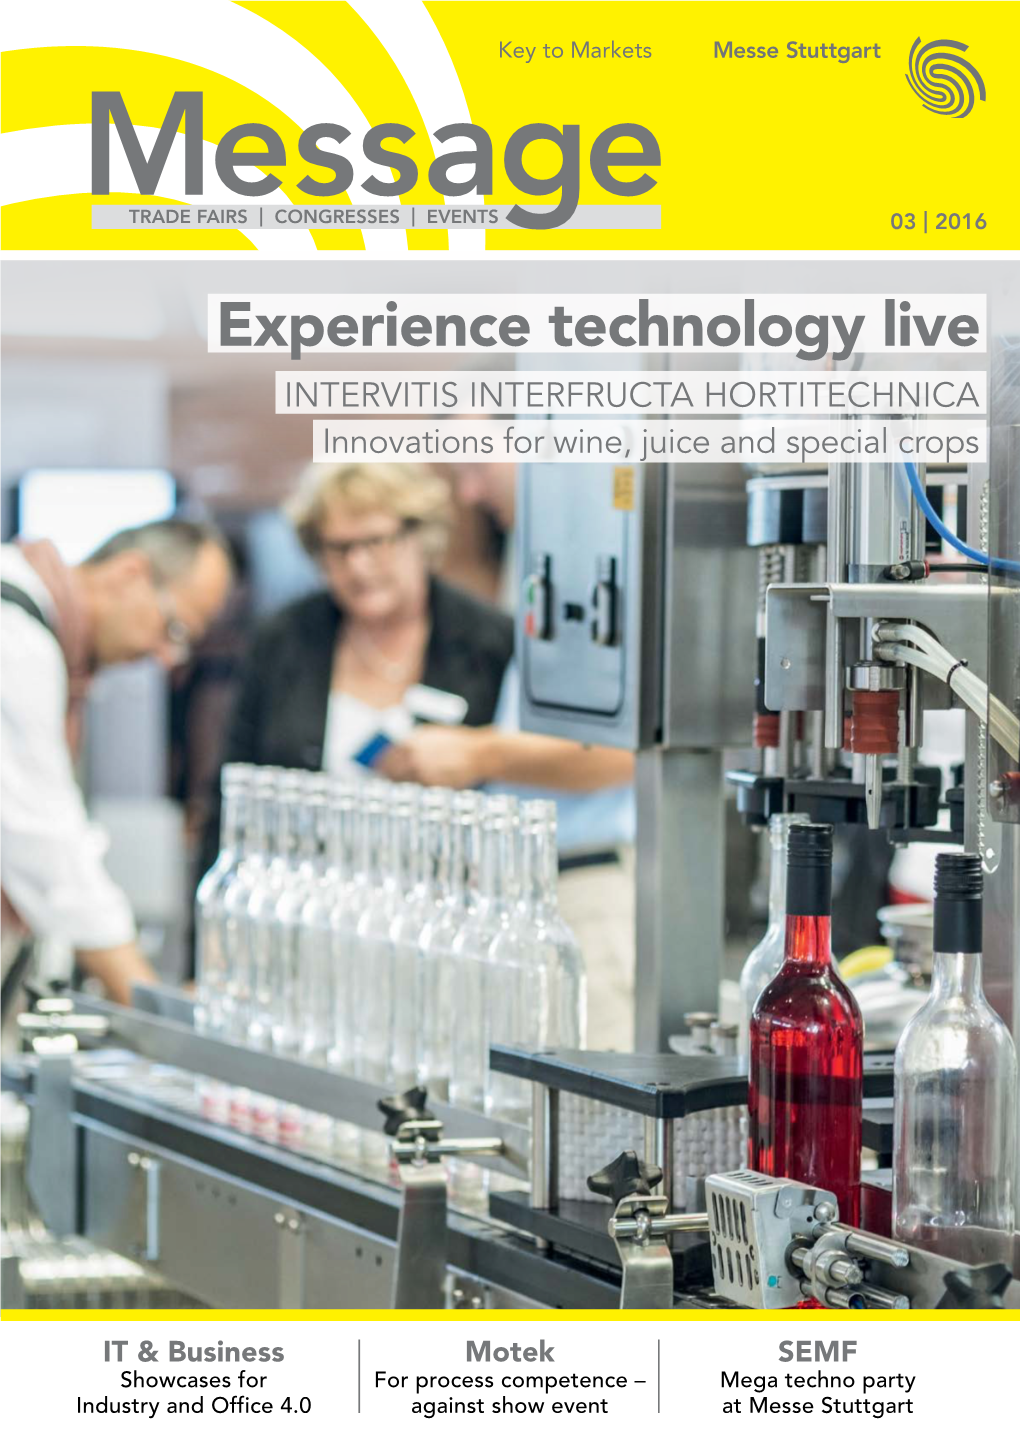 Experience Technology Live INTERVITIS INTERFRUCTA HORTITECHNICA Innovations for Wine, Juice and Special Crops